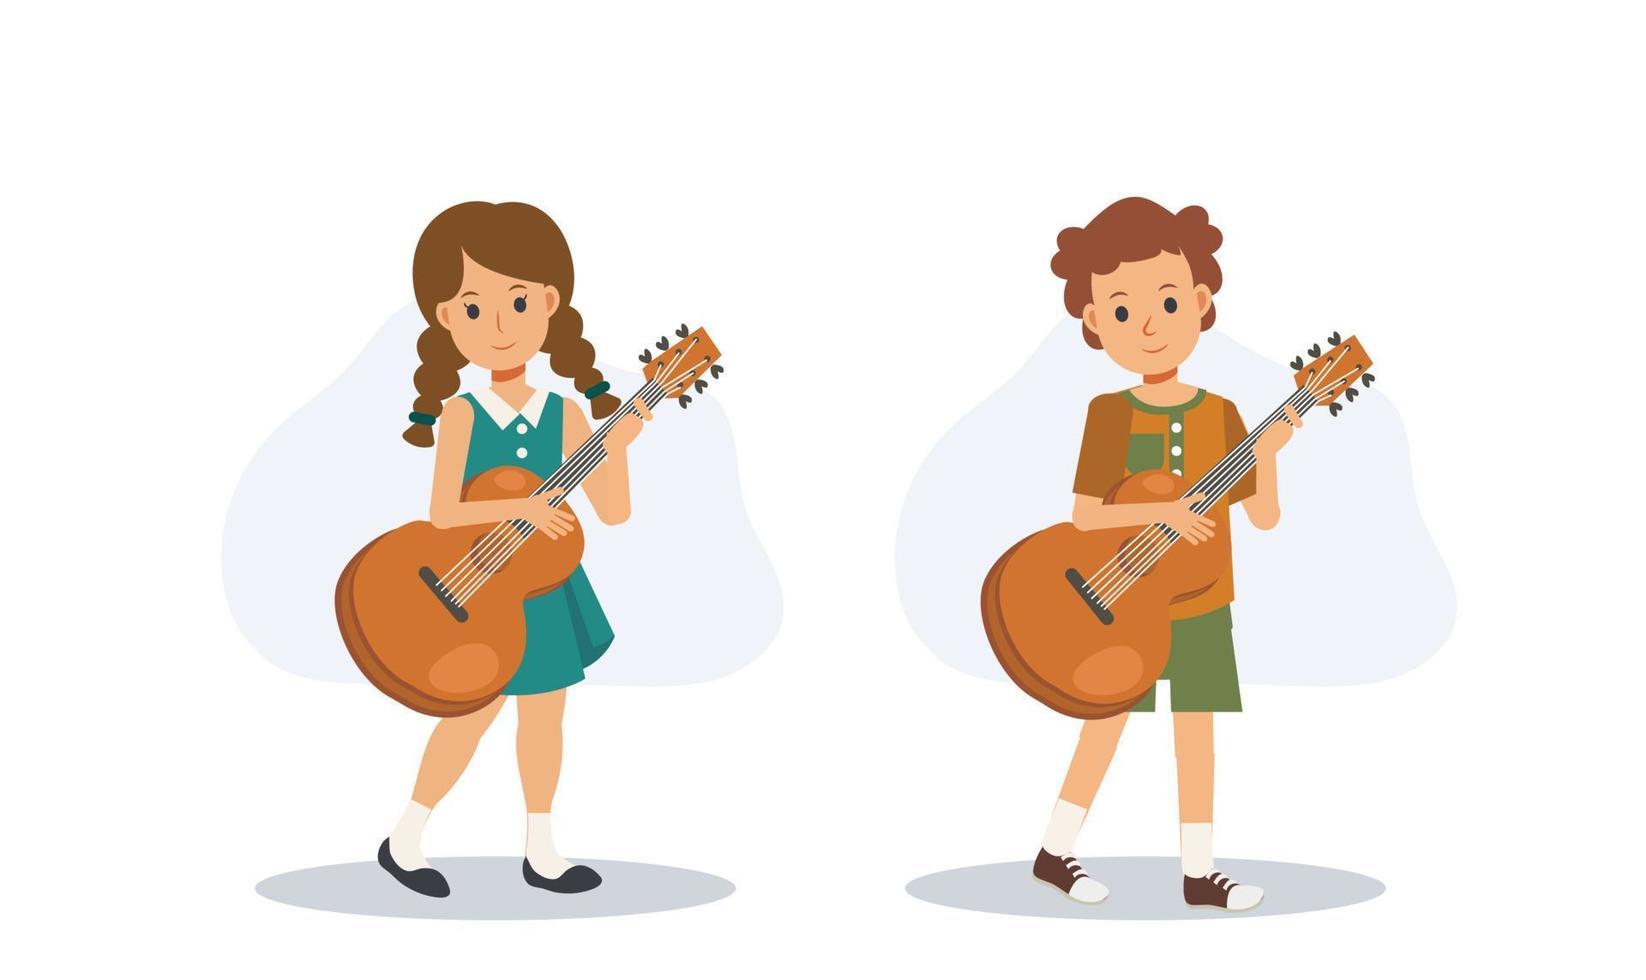 kid playing guitar, music studying, hobby, Learning music.Flat vector 2d cartoon character illustration.